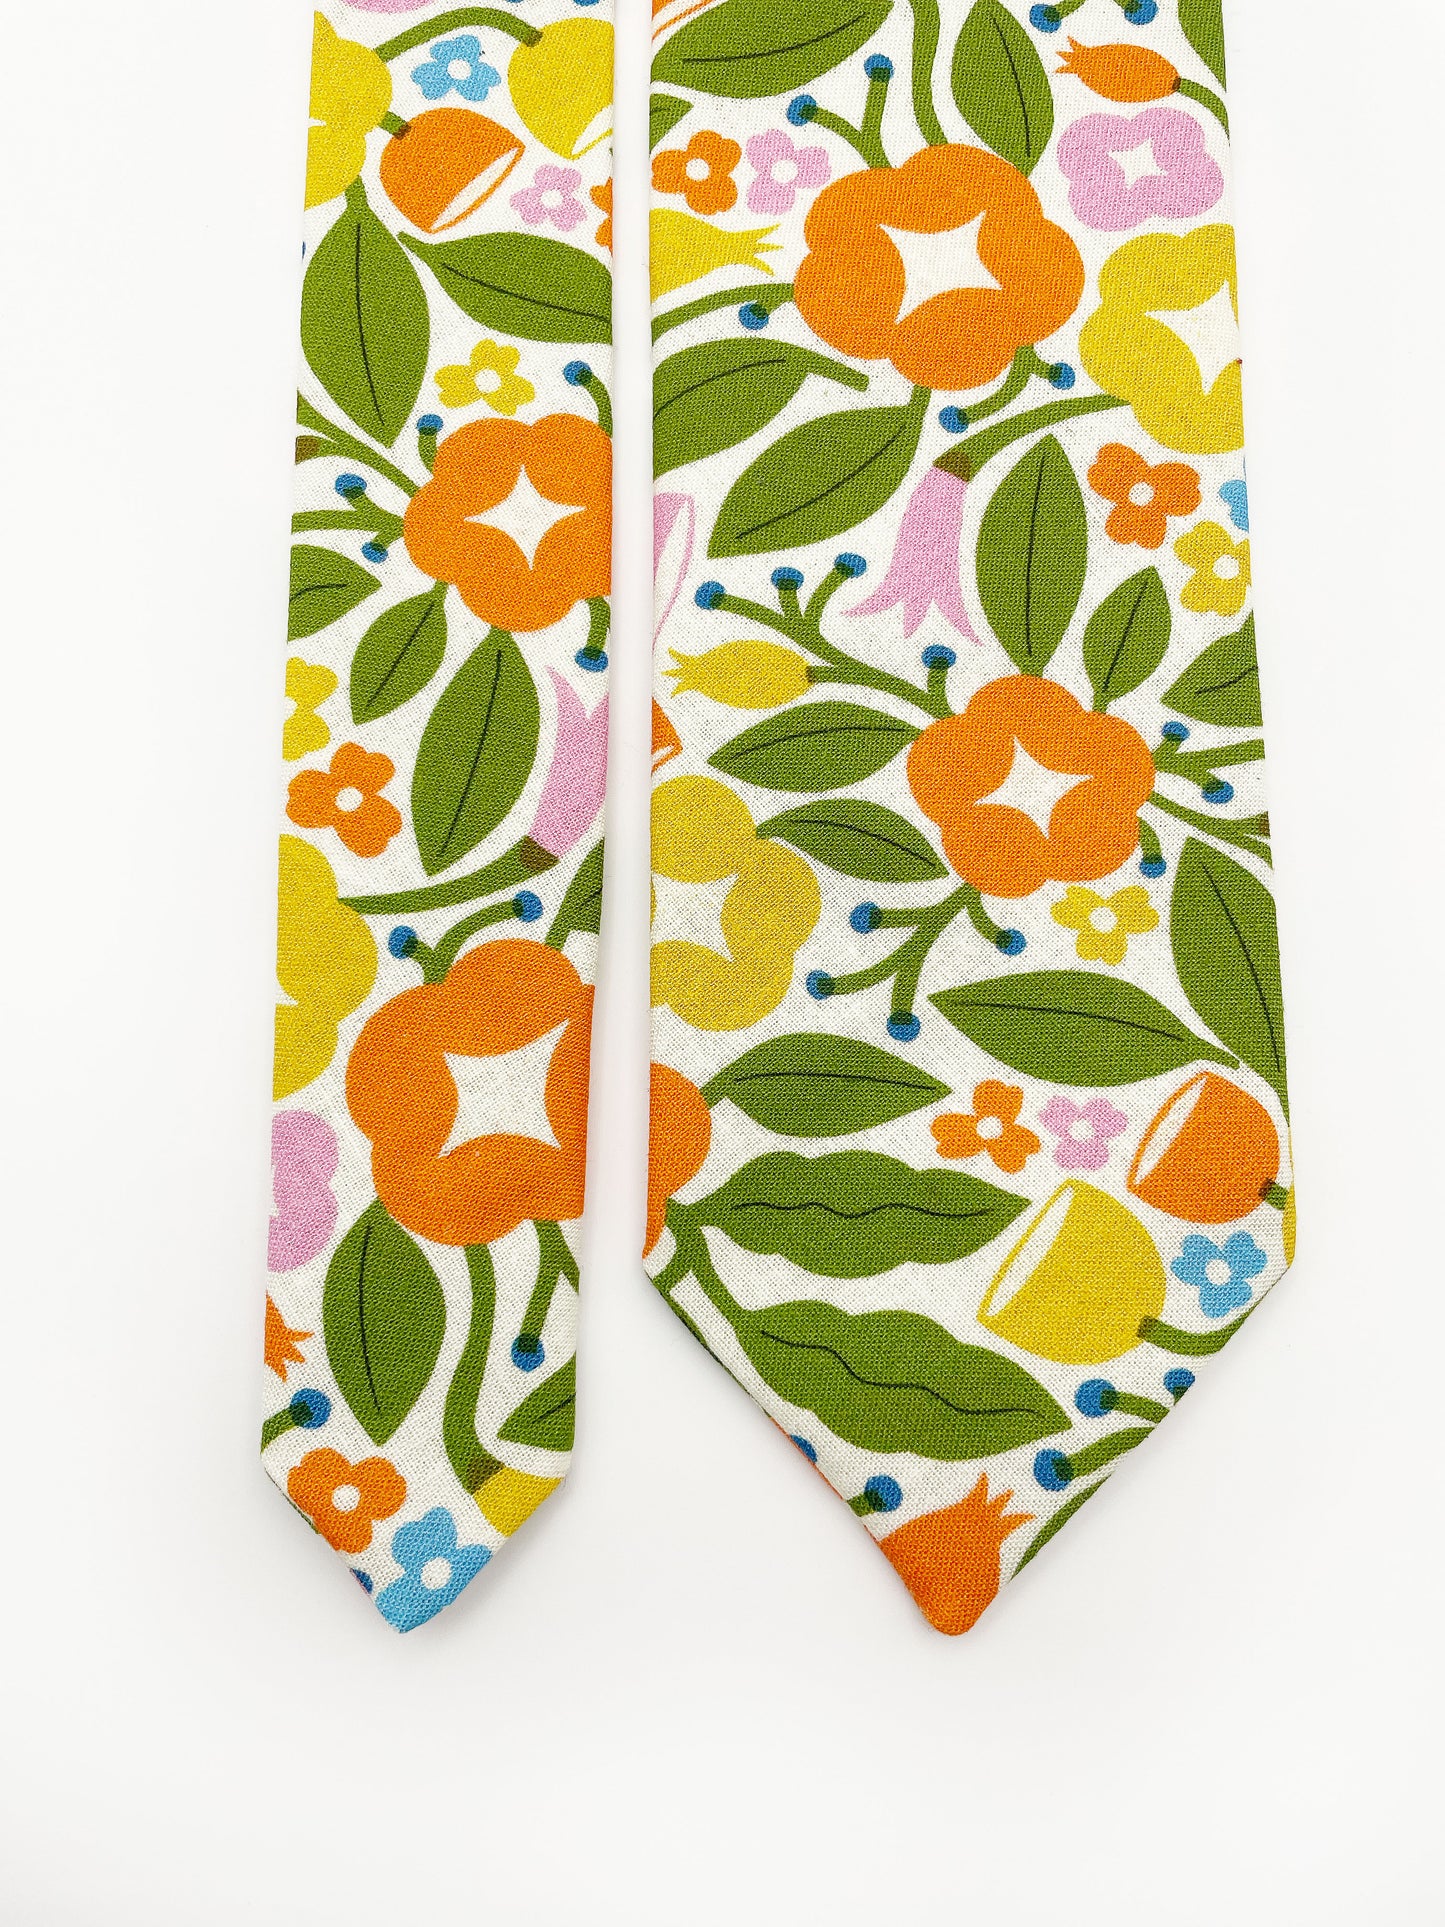 A vibrant necktie with bold yellow, orange, and pink flowers.